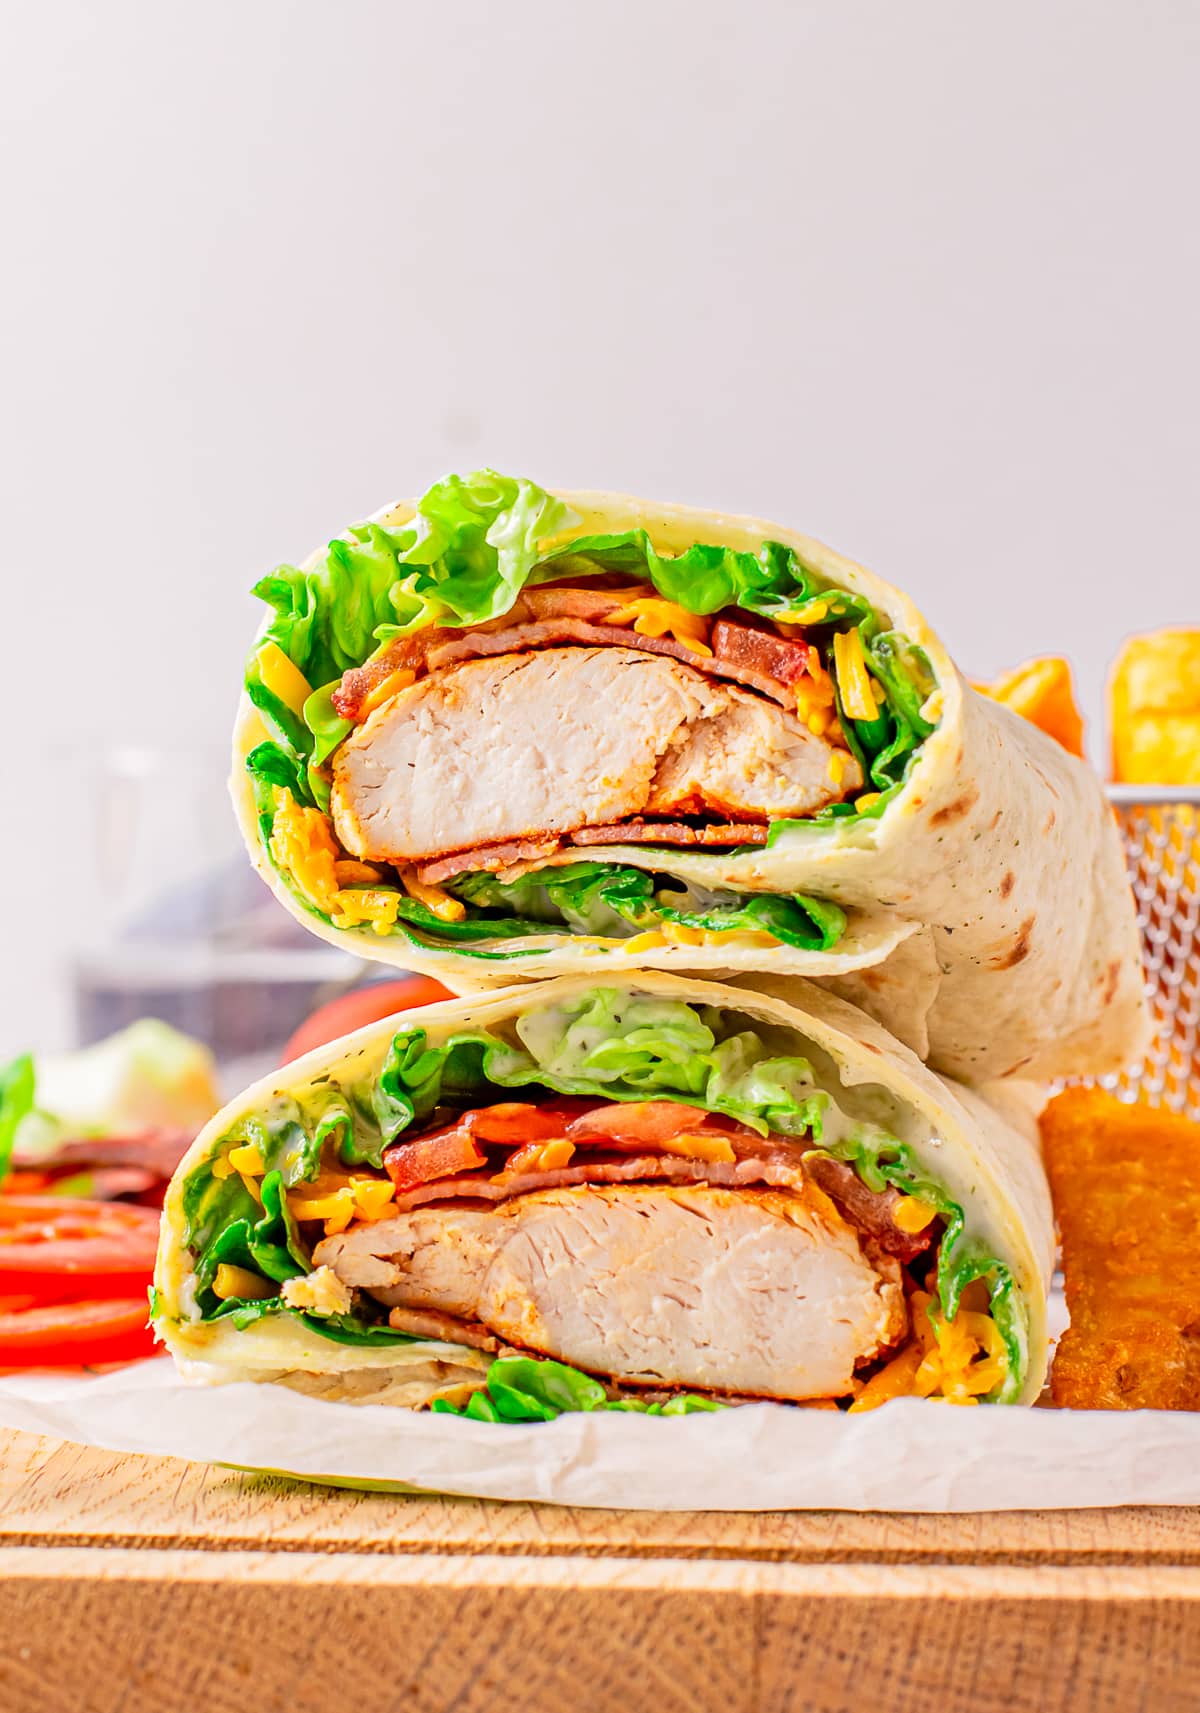 A bacon ranch chicken wrap cut in half to show the interior, two piece stacked on top of each other. Served on a wooden cutting board